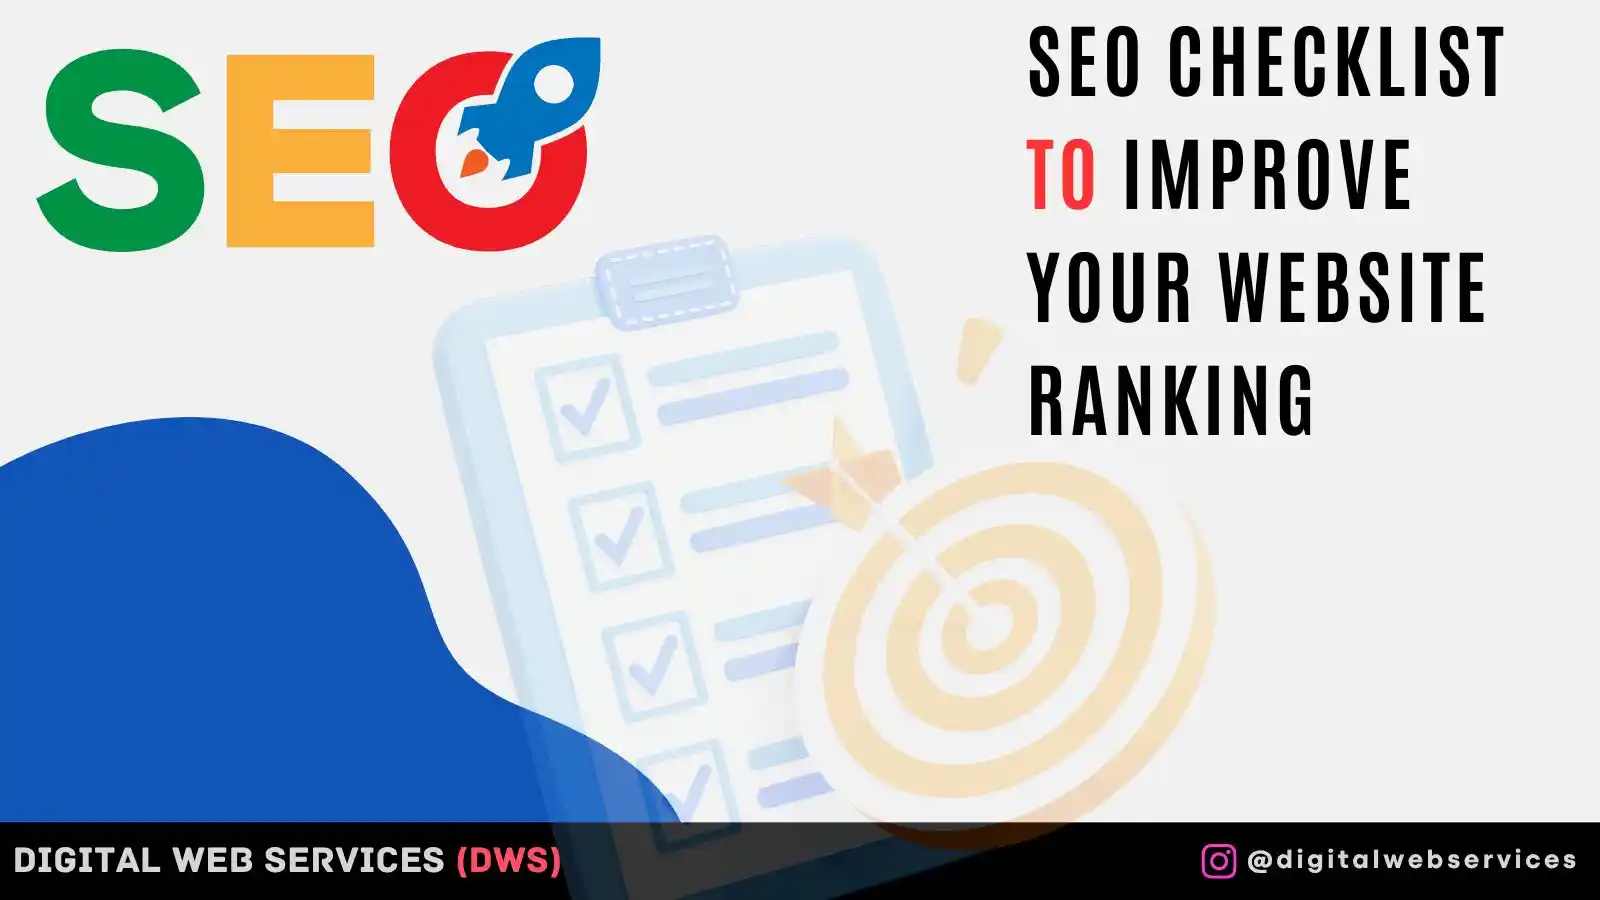 SEO Checklist To Improve Your Website Ranking